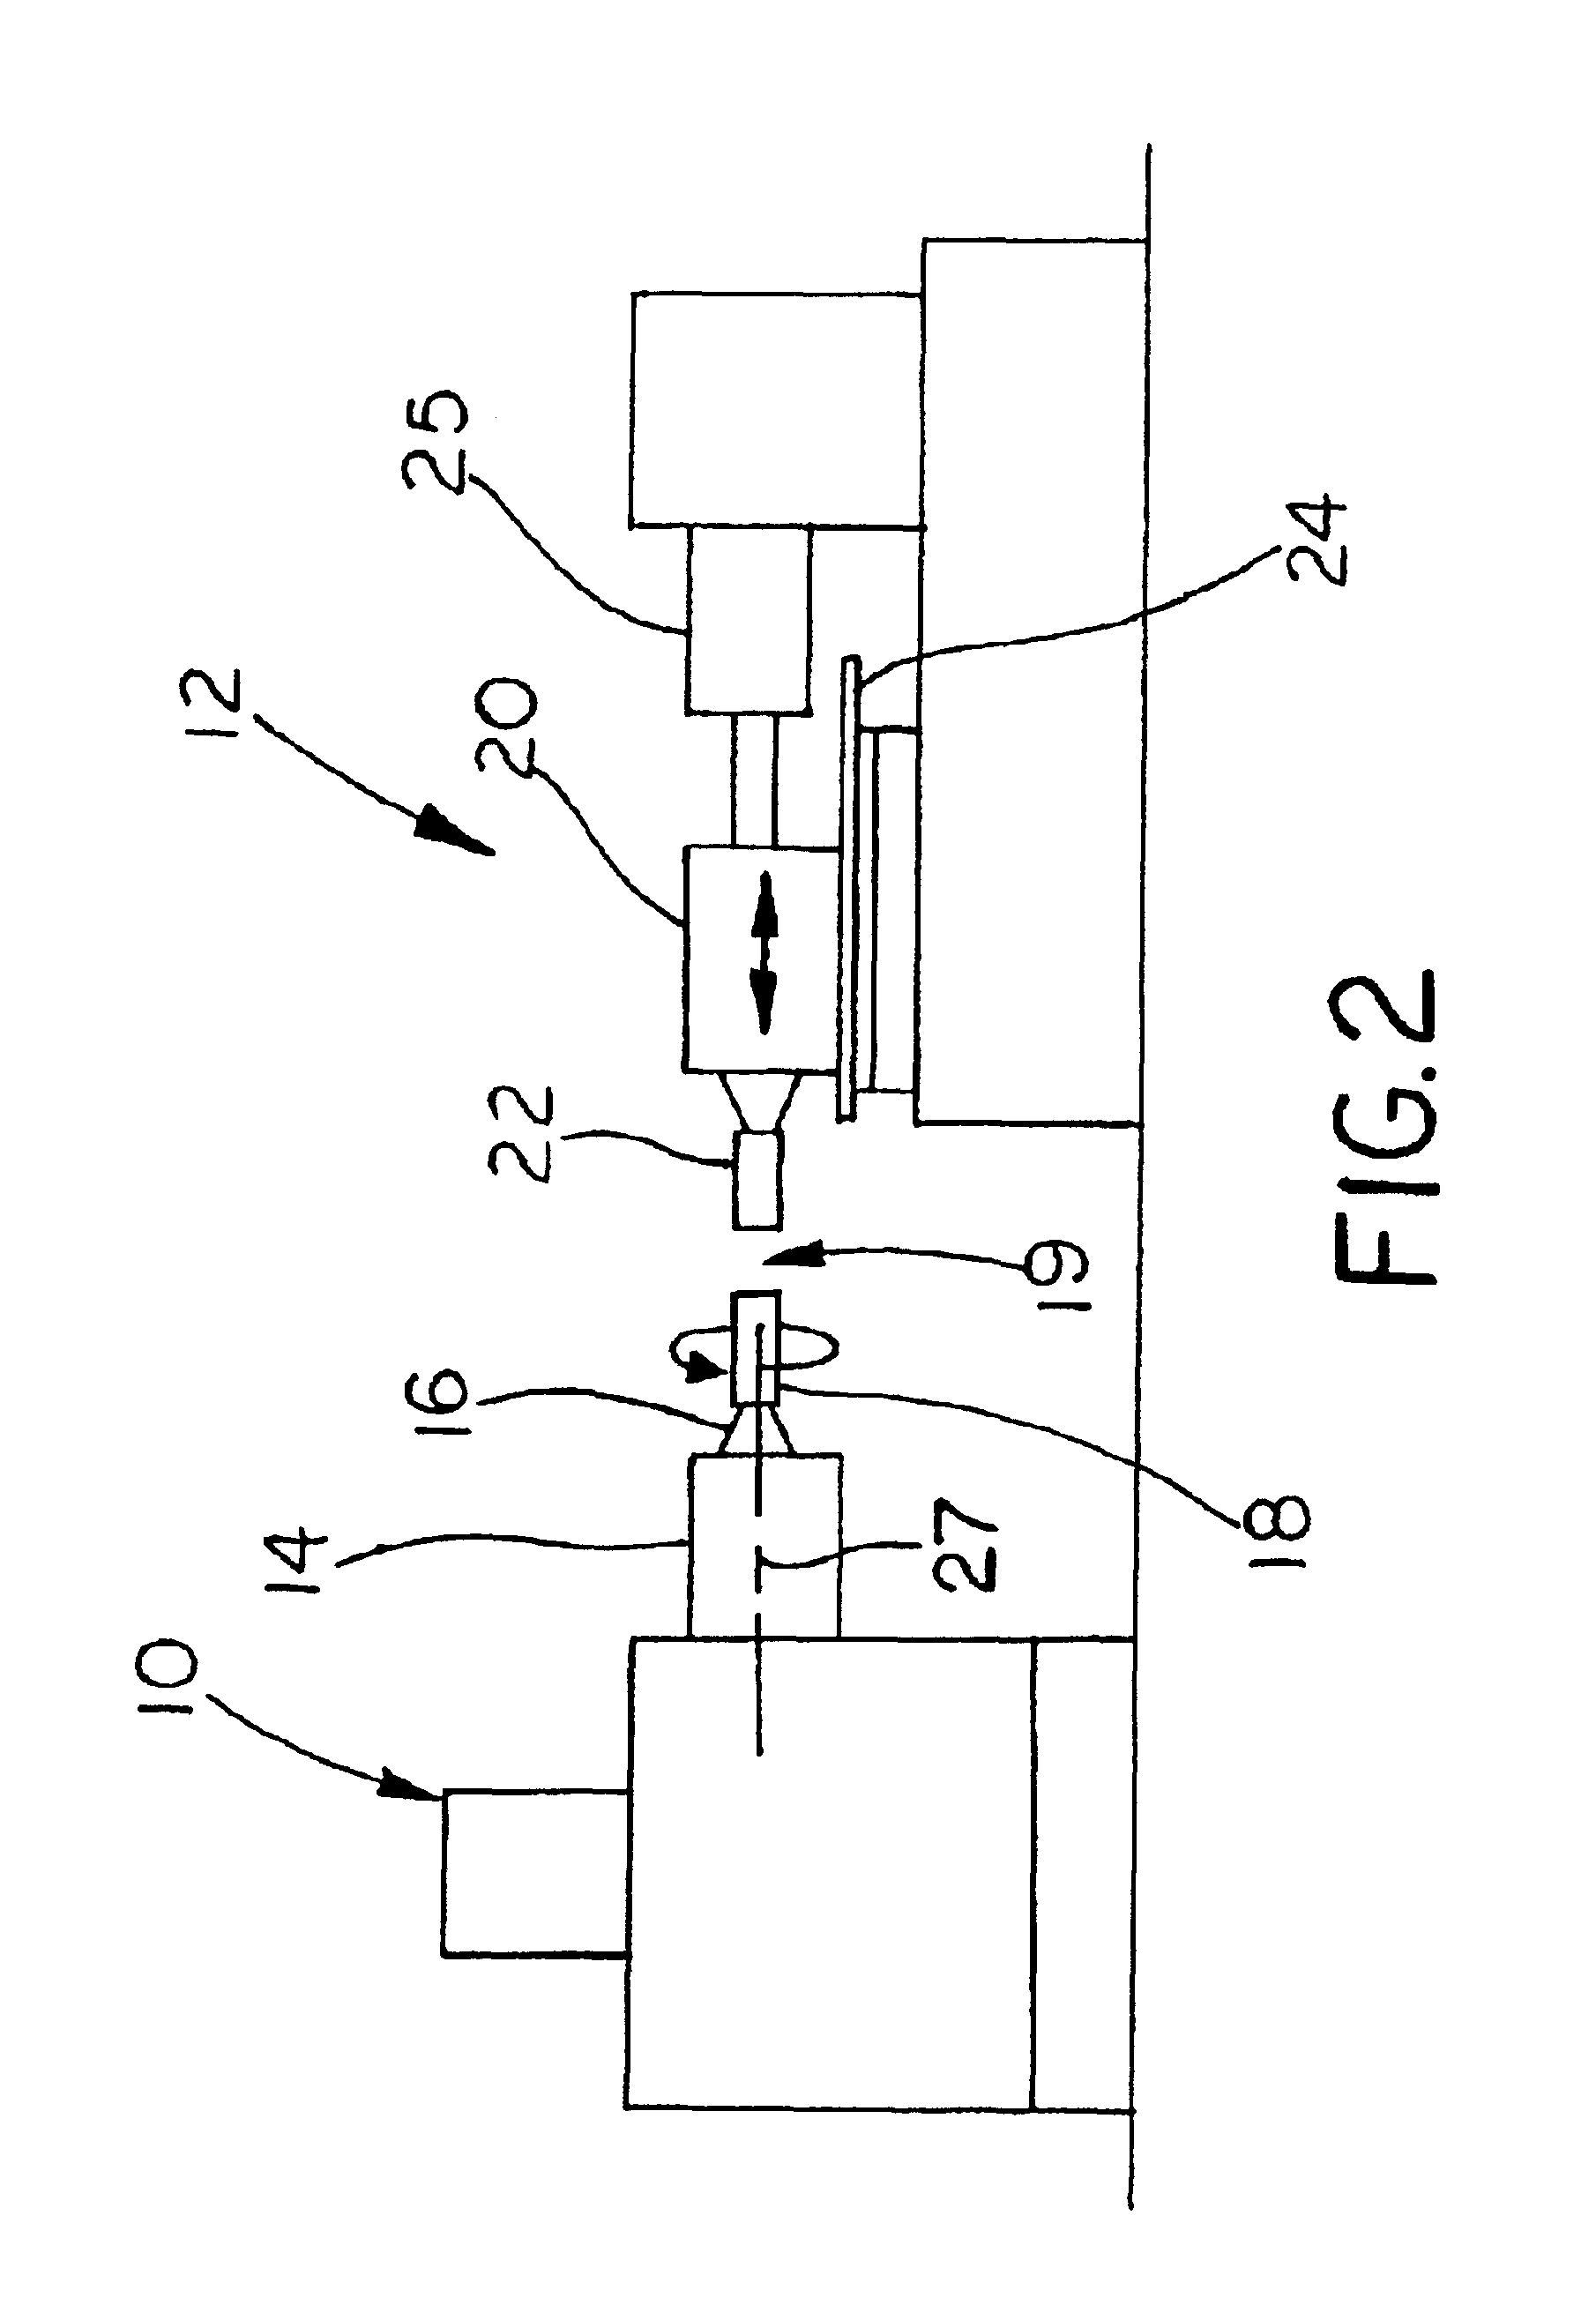 Angular orientation control system for friction welding